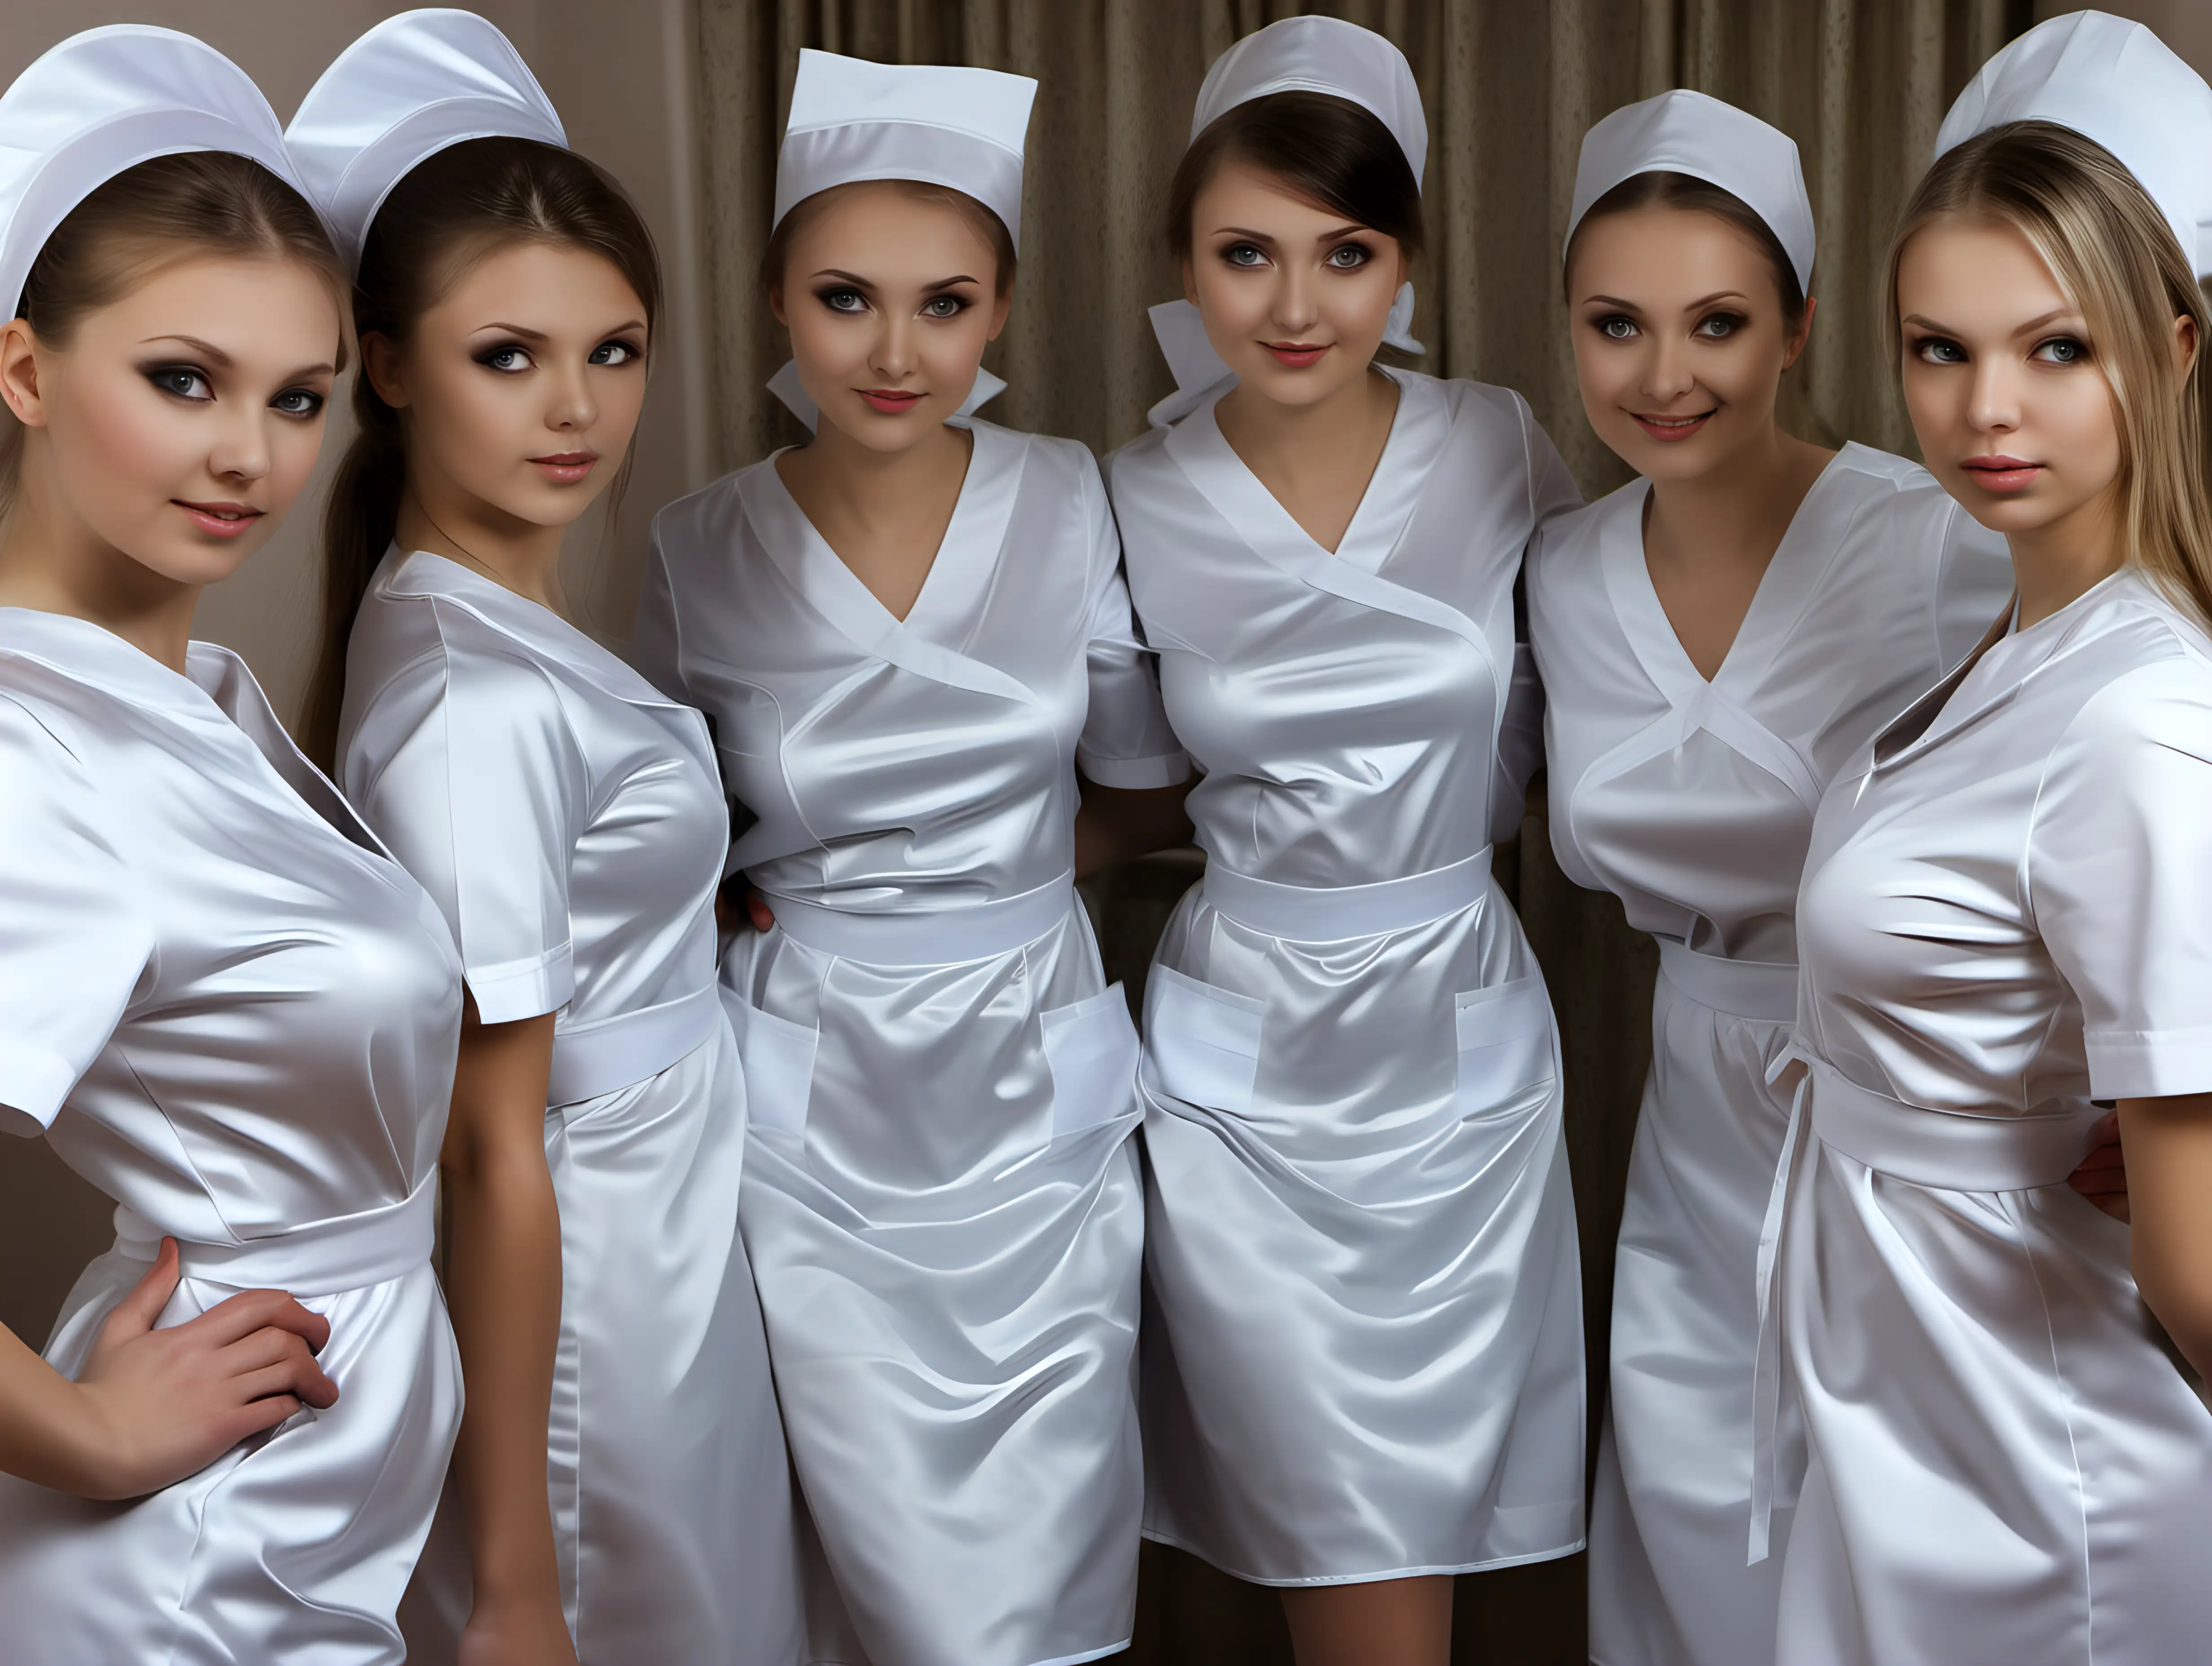 Multigenerational Bonding Russian Girl and Old Mothers in Satin Nurse Uniforms